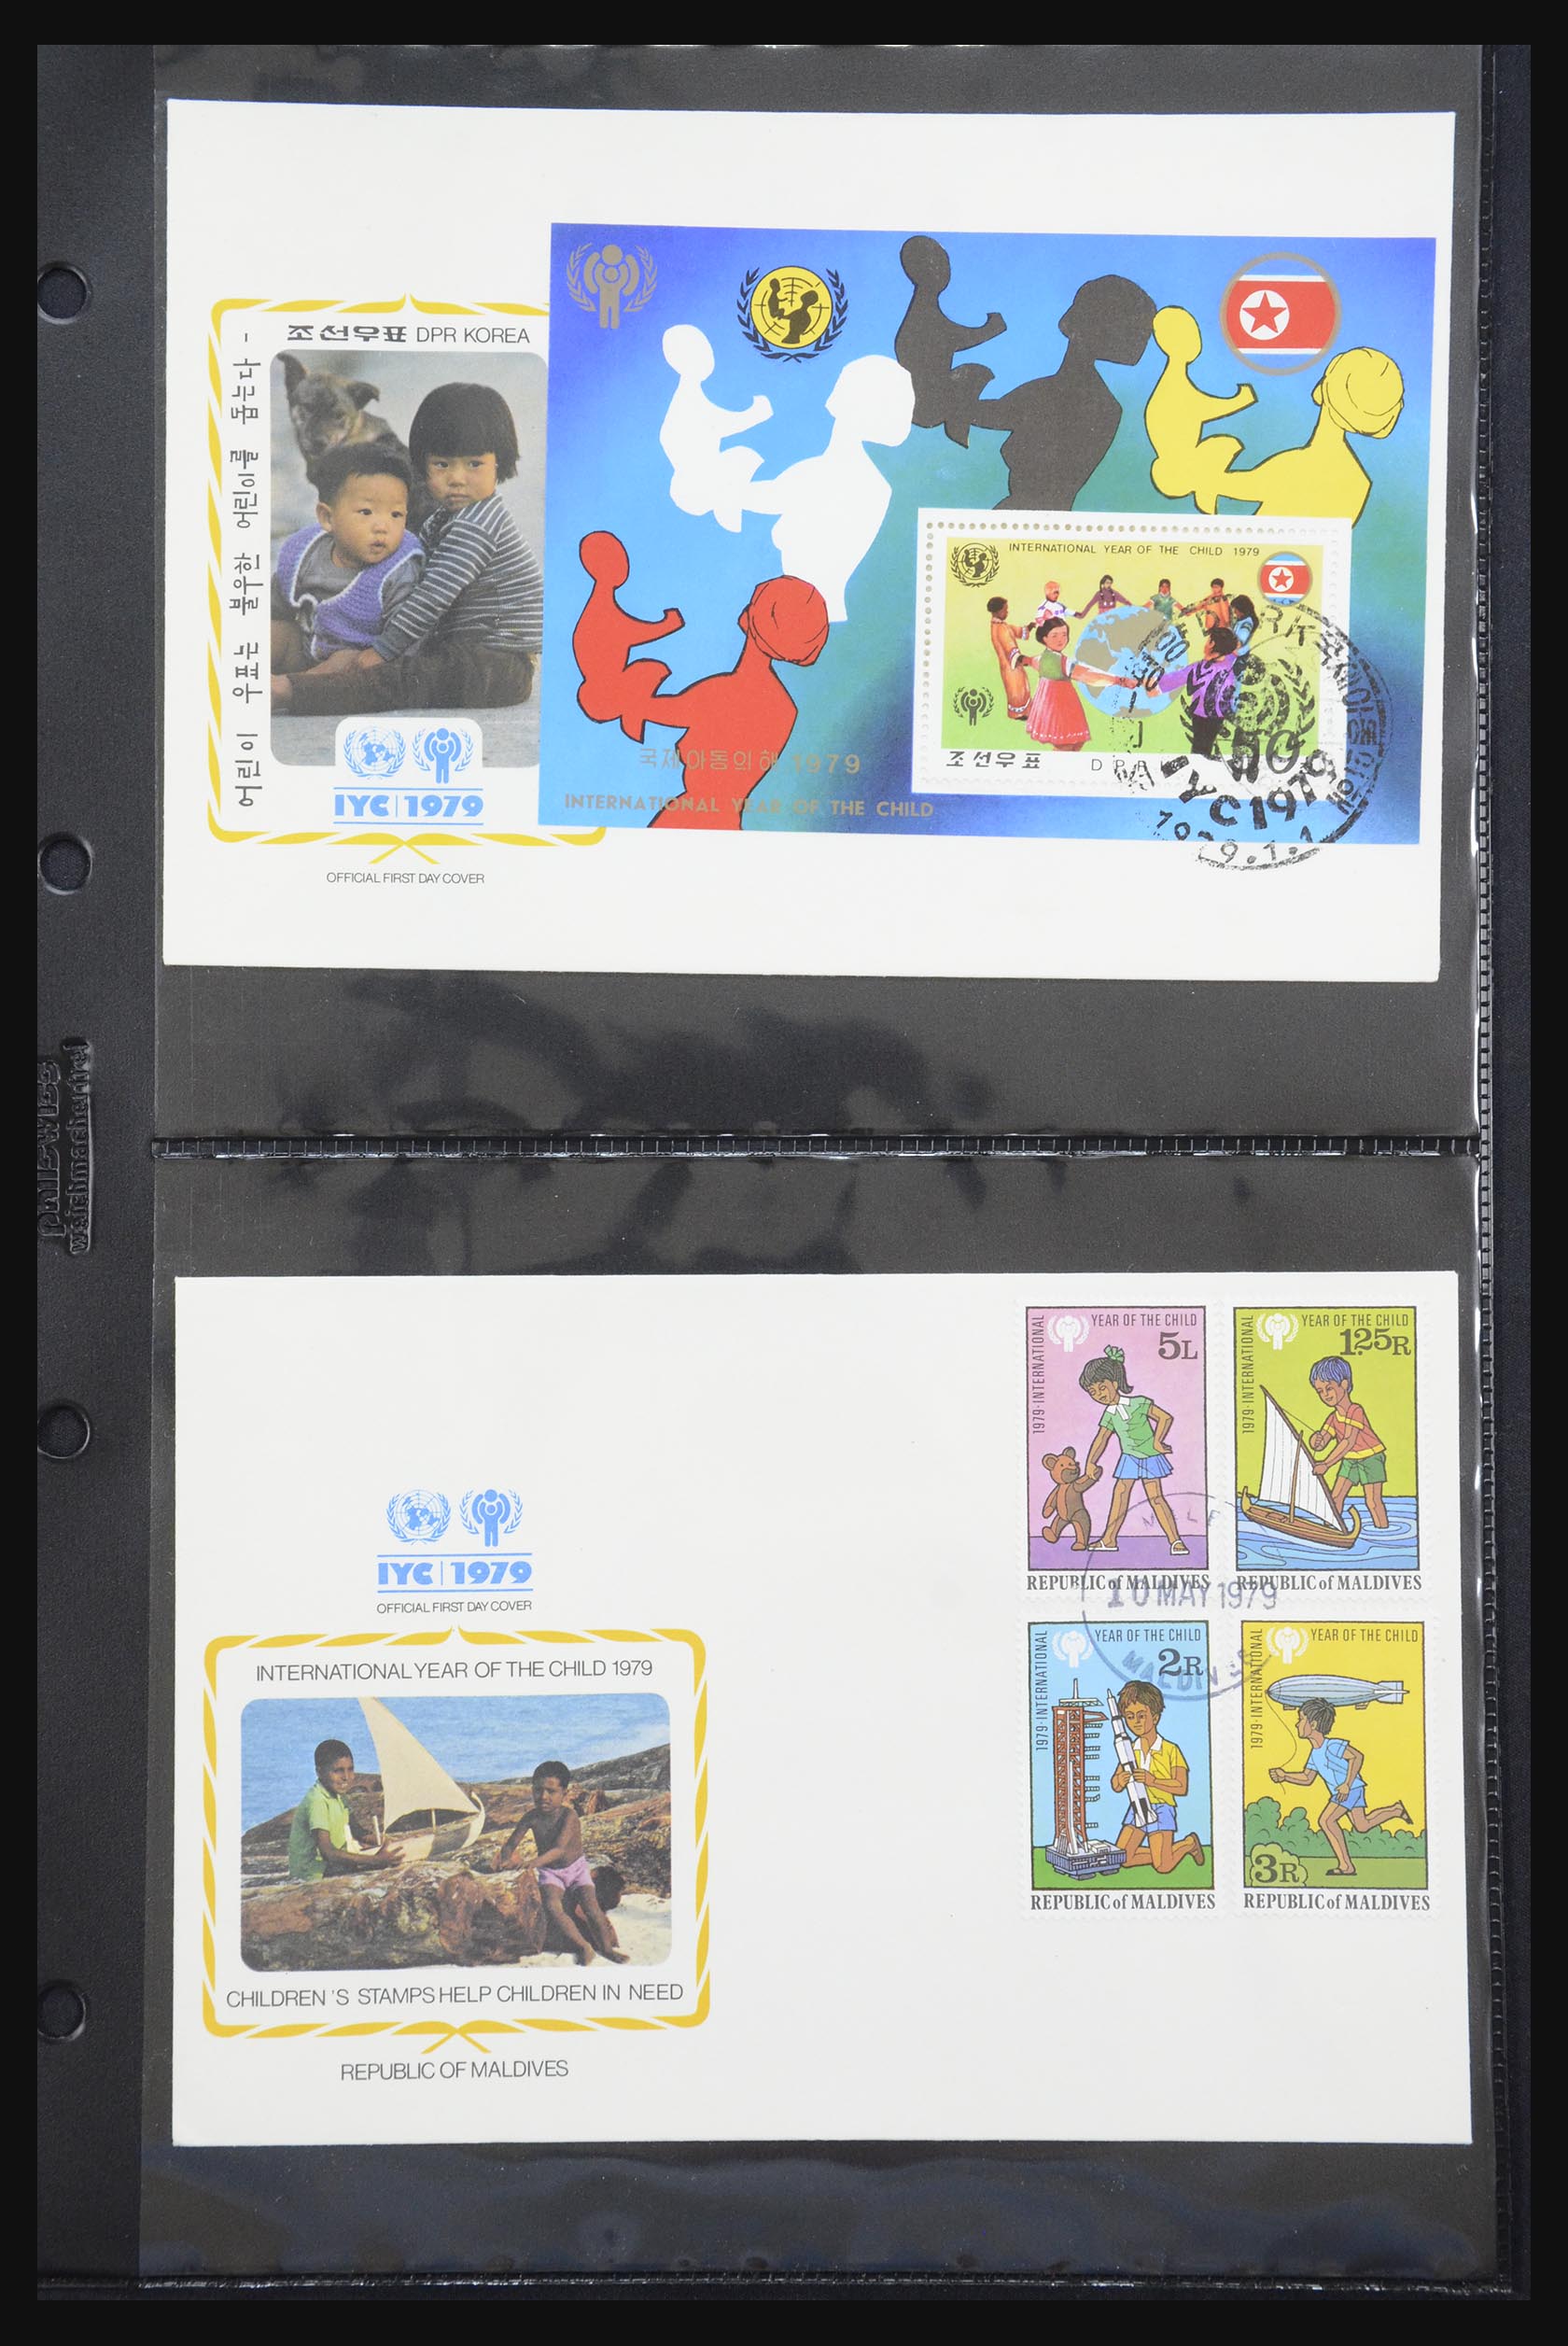 31957 060 - 31957 Unicef year of the child 1979.